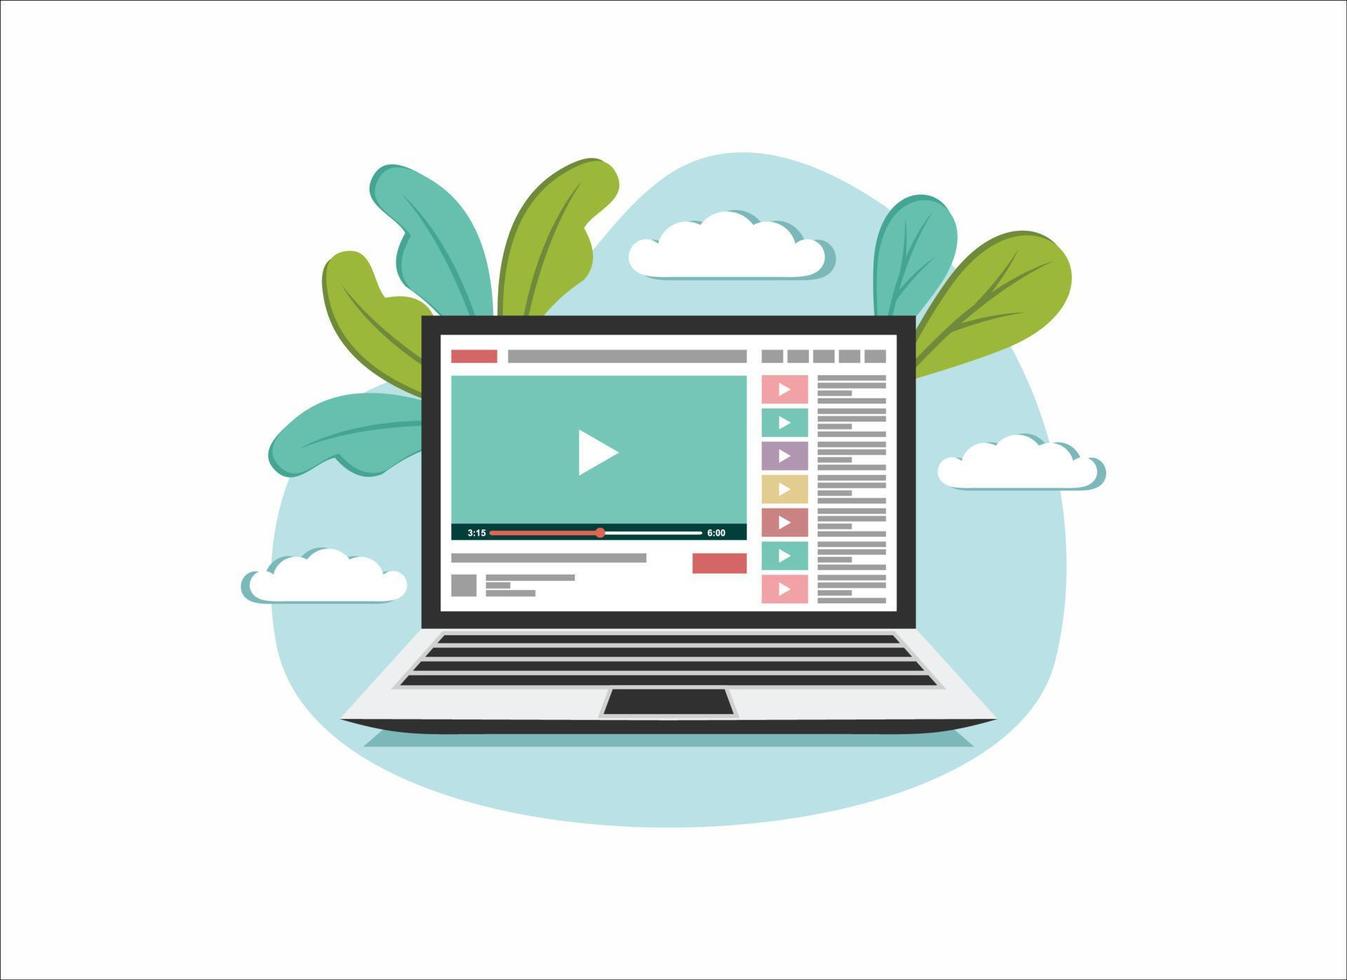 video media player icon on laptop computer concept, flat vector illustration